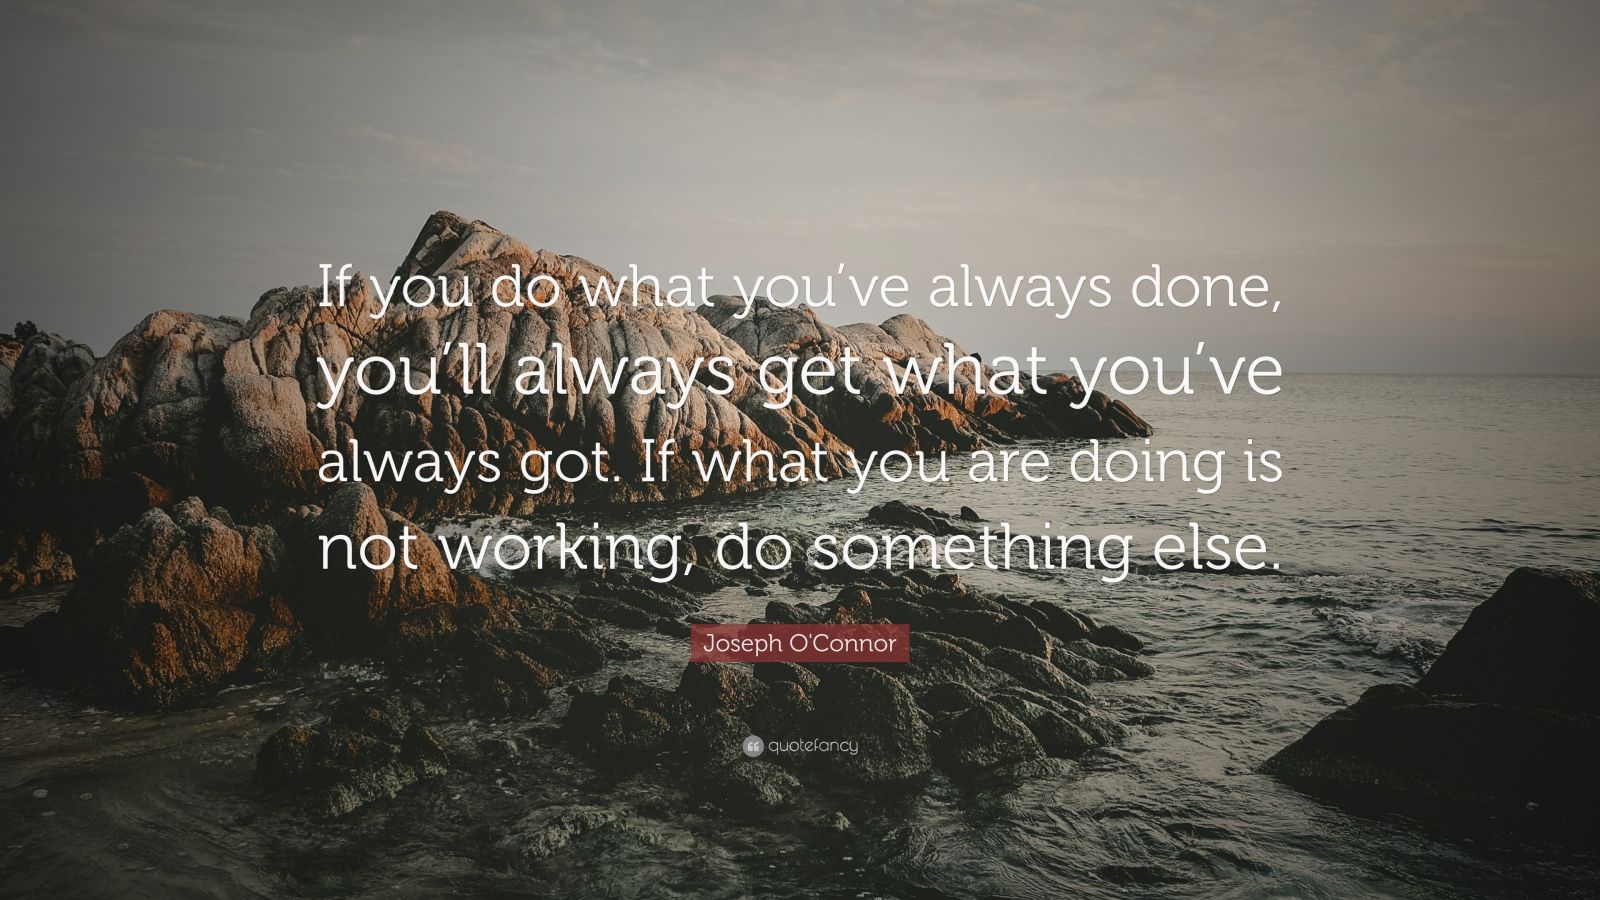 Joseph O'Connor Quote: “If you do what you’ve always done, you’ll ...